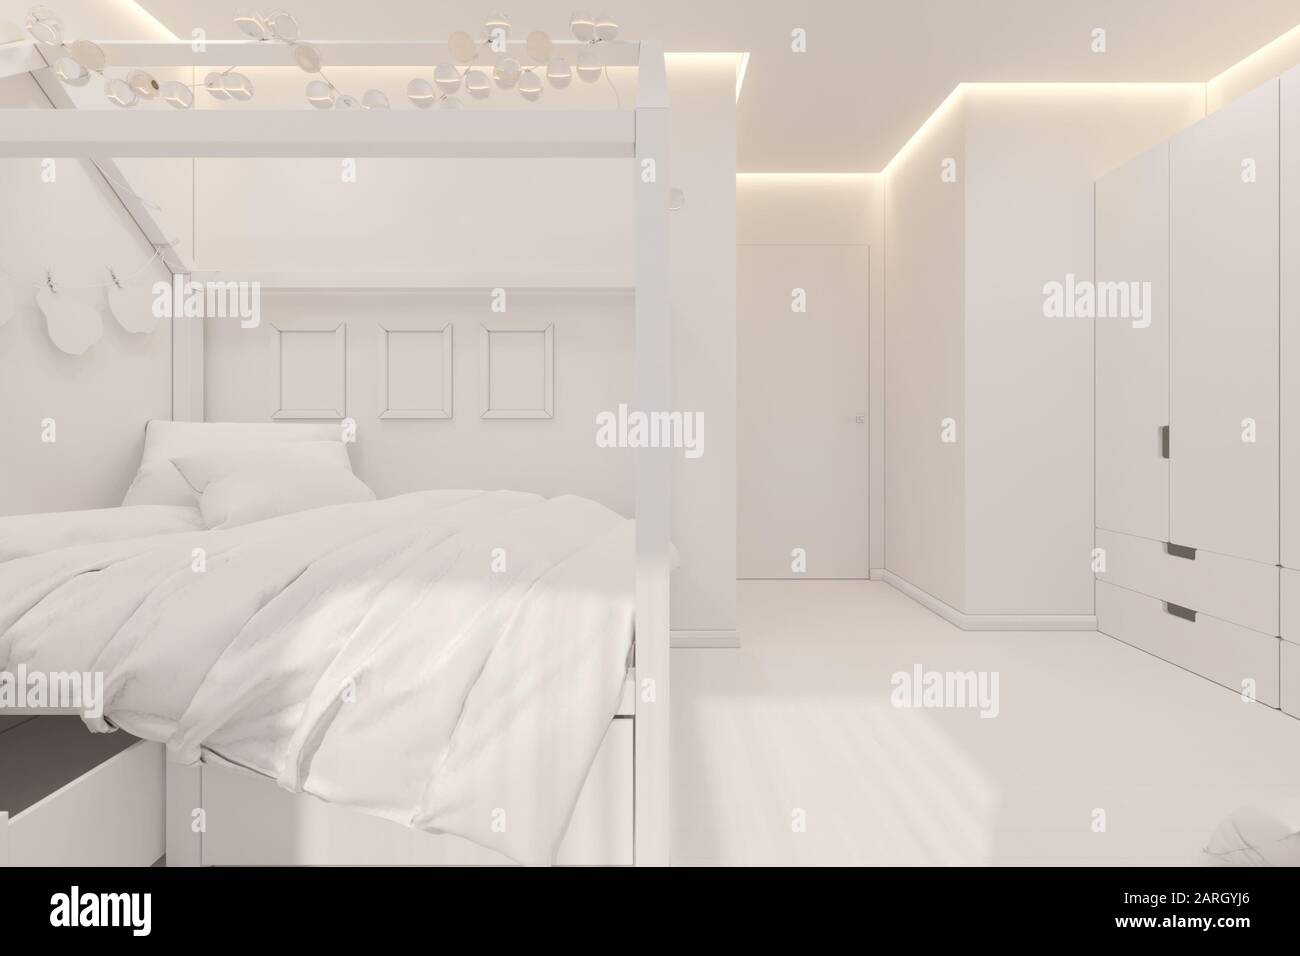 The Interior Design Girl Playroom And Bedroom In The Scandinavian Style Stock Photo Alamy,Design Your Own Soccer Cleats